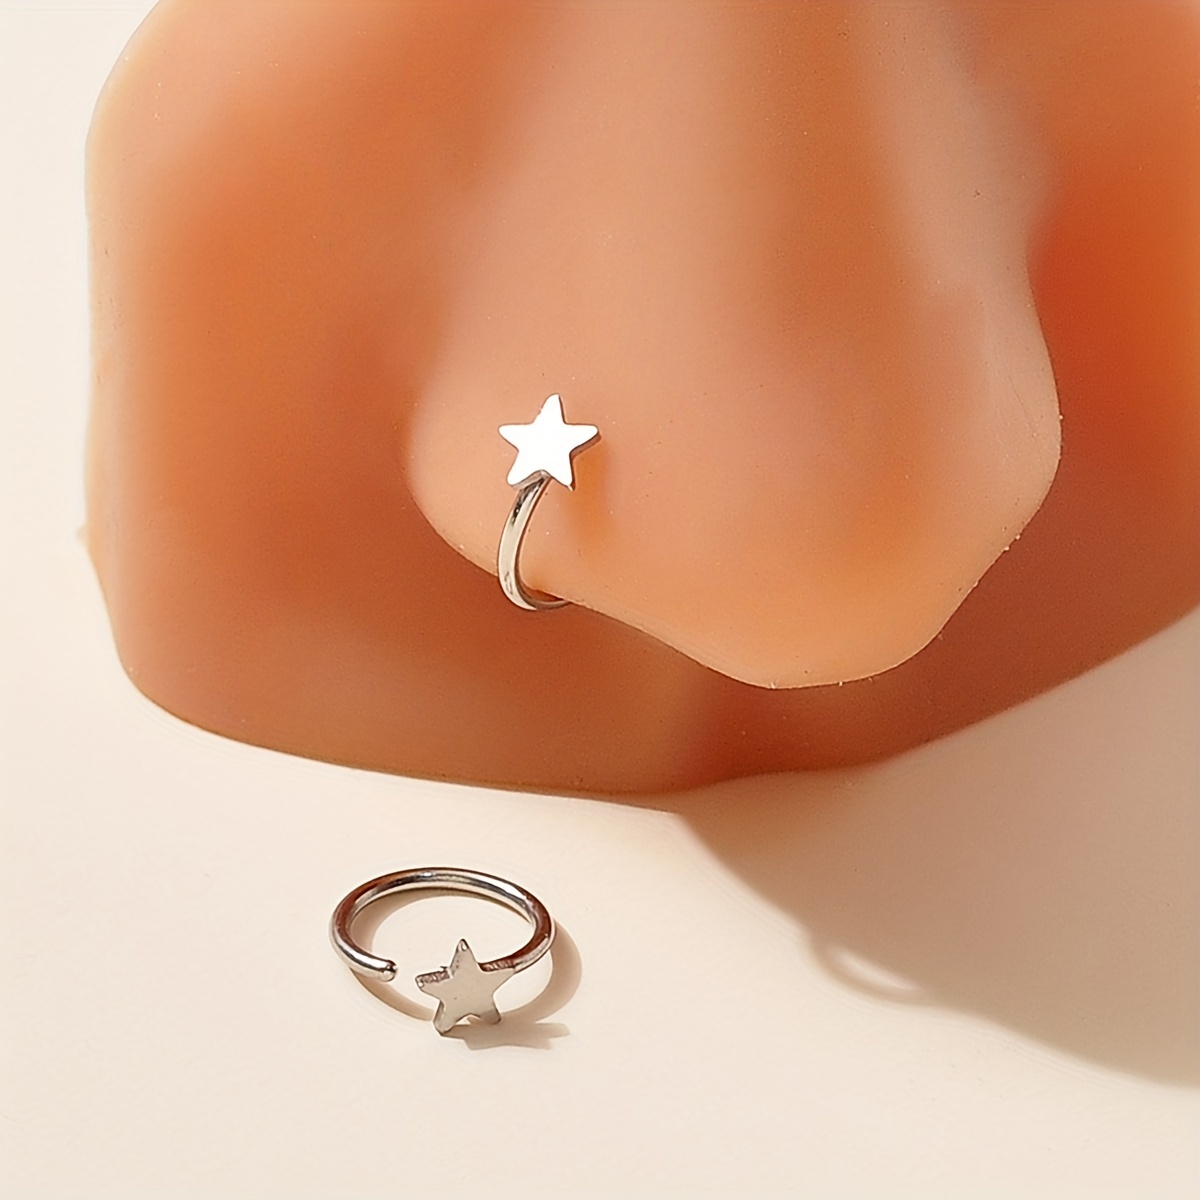 2 Pcs Personality No Piercing Stainless Steel Star Shape Nose Clip